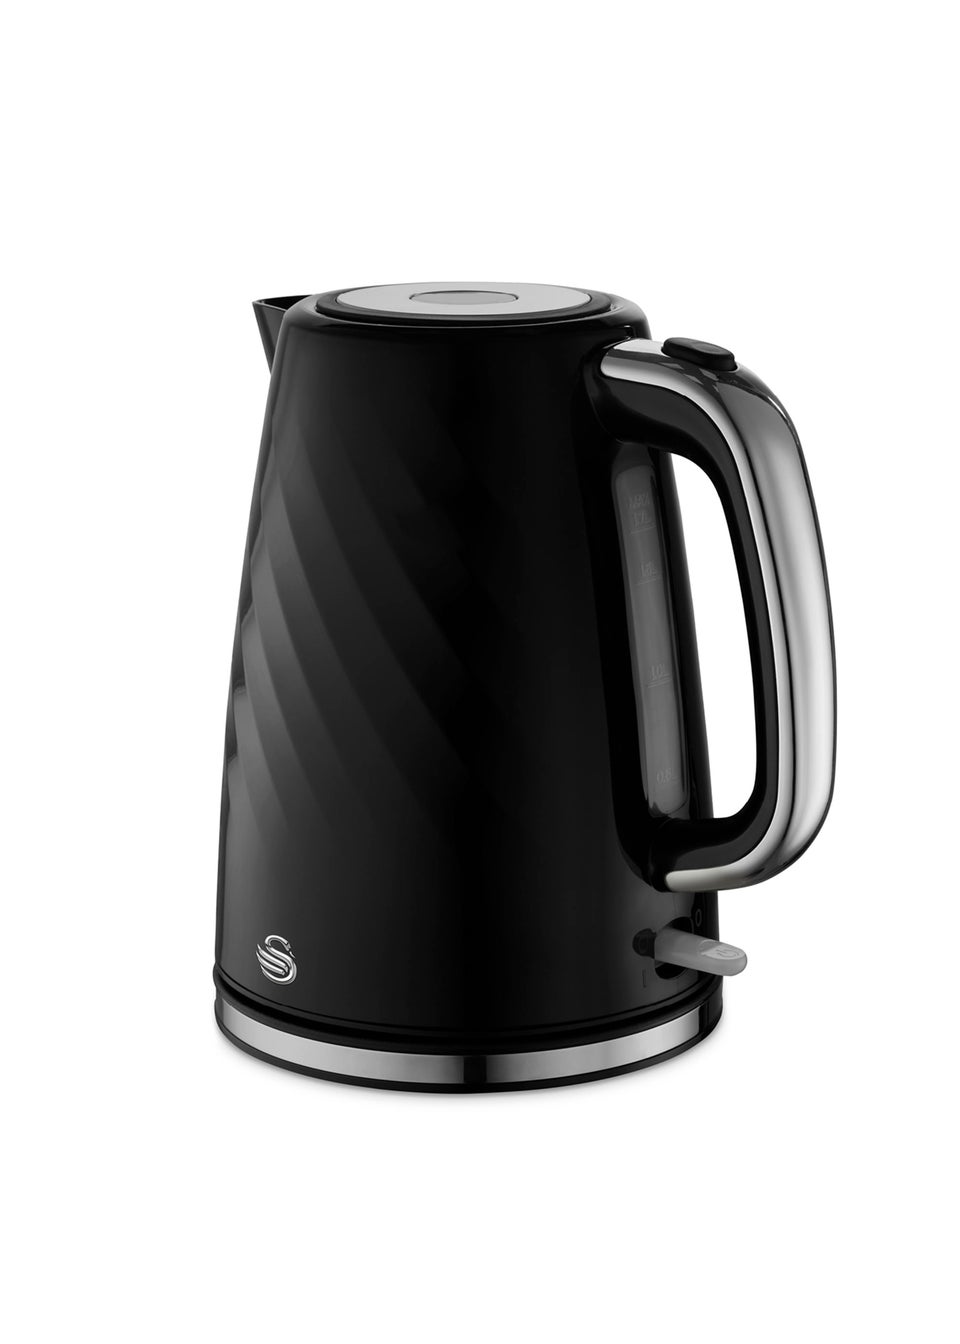 Swan Black Windsor Textured Kettle with Silver Handle (1.7L)